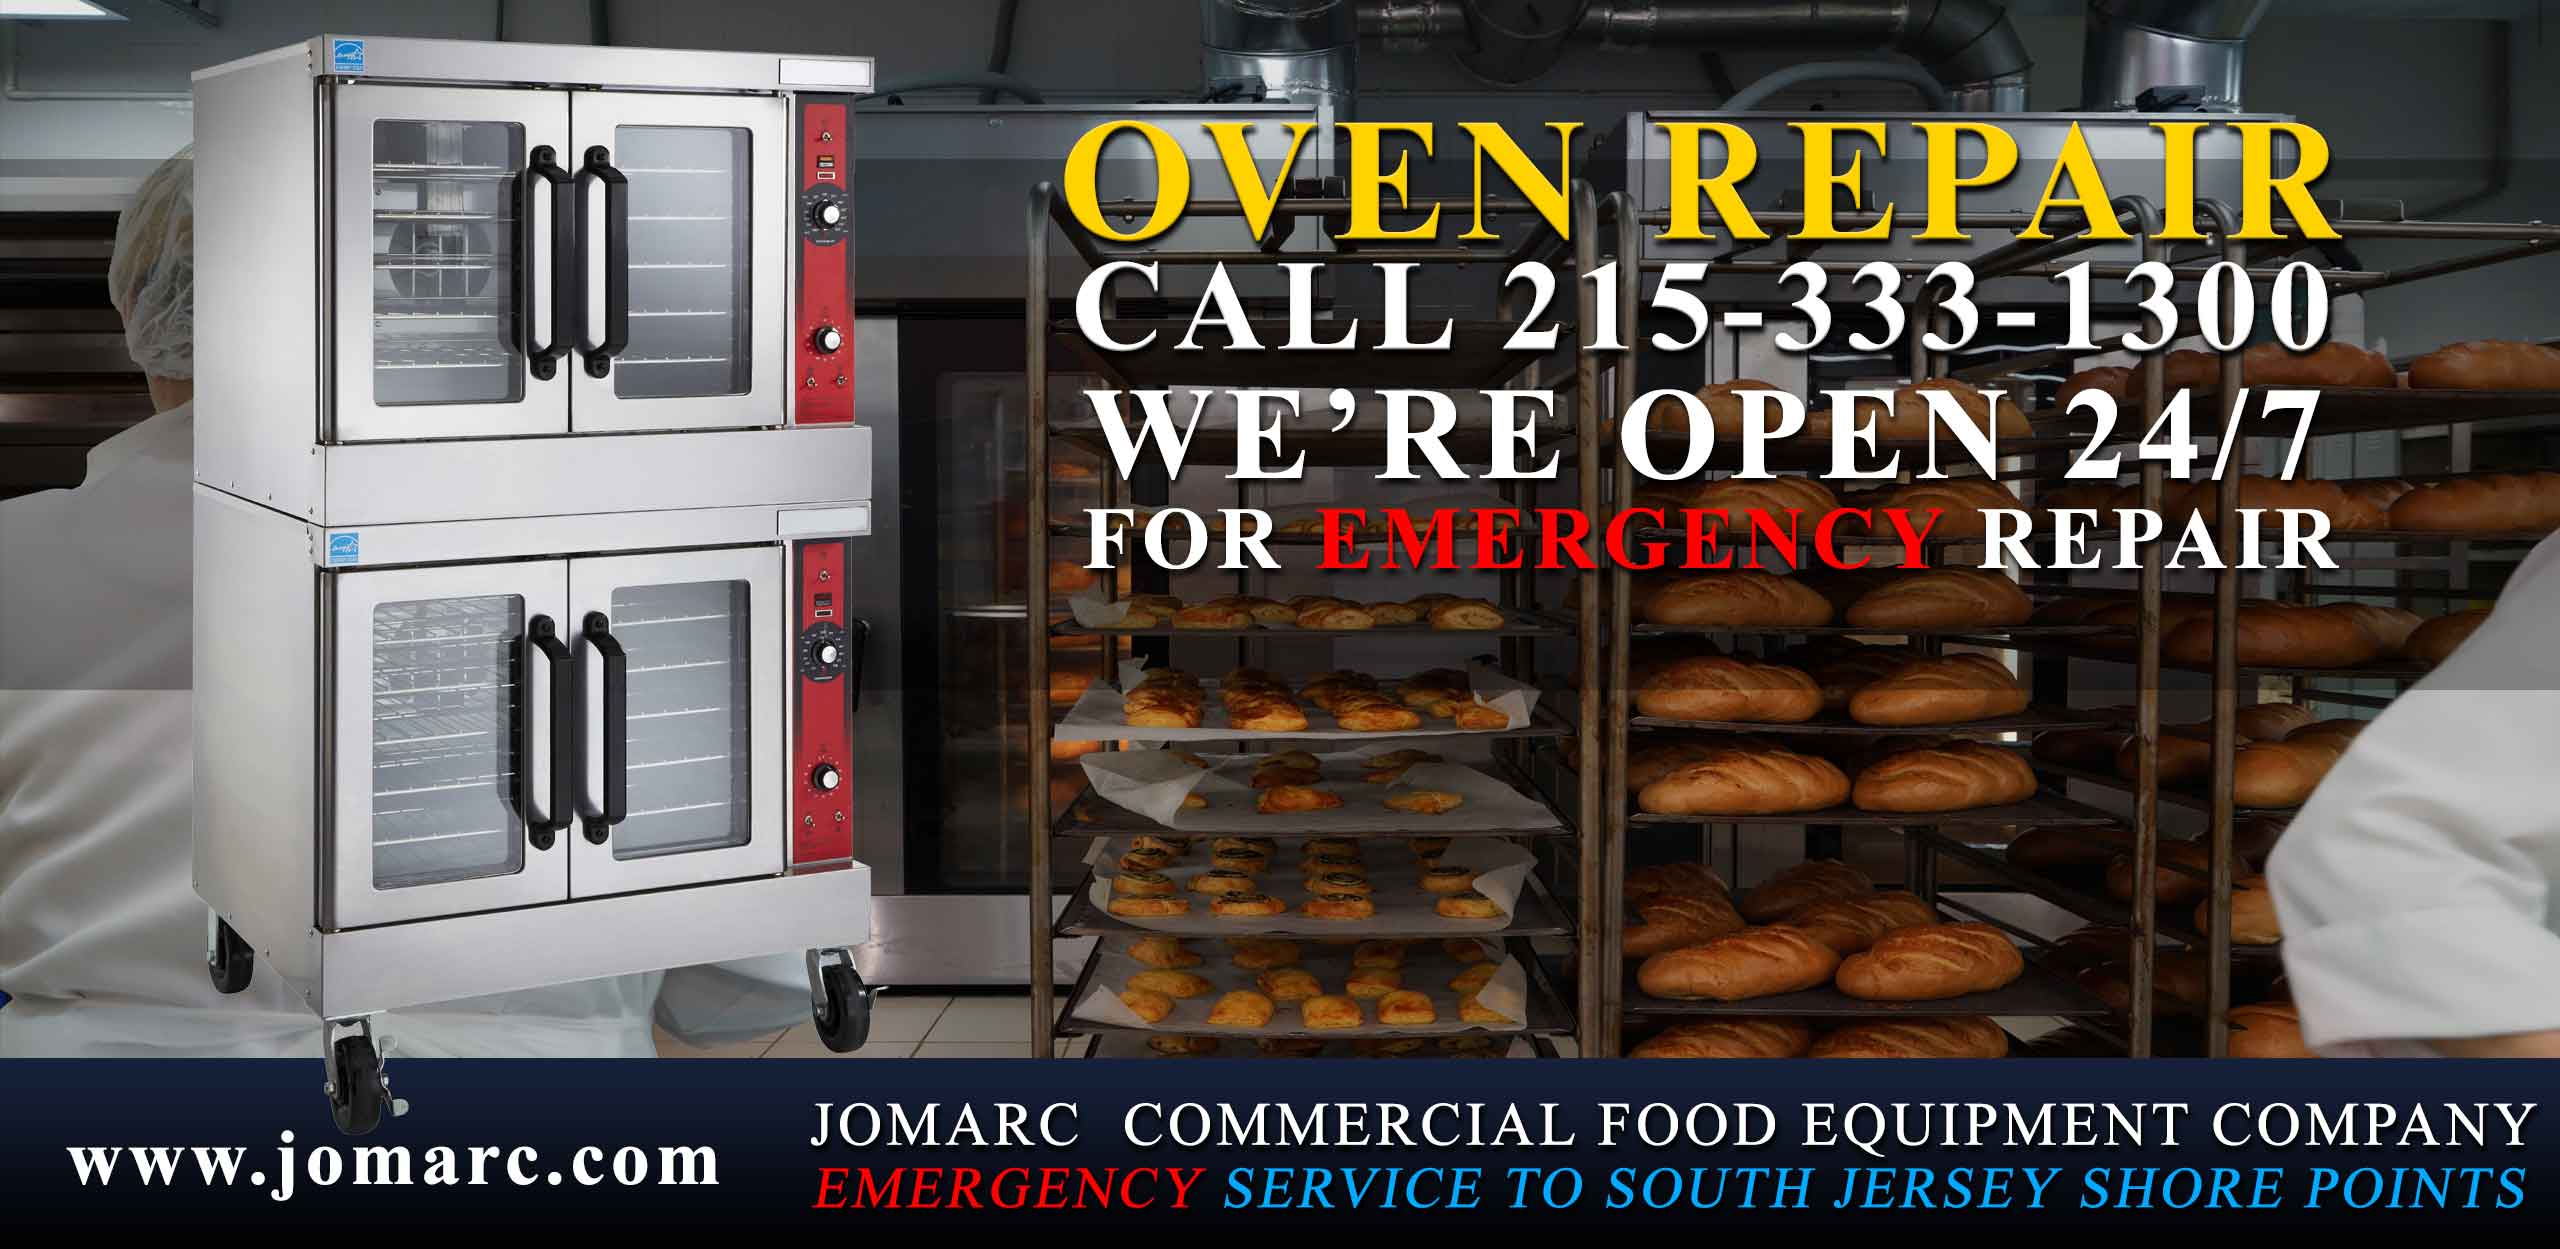 Commercial Oven Repair Philadelphia Jomarc services all brands and models of ovens: Convection Countertop Microwave Combination Ovens Conveyor and Impinger Rapid Cook / High Speed Rotisserie Multi-Cook Bakery Cook and Hold Cabinets Indoor Roaster Smoker Microwaves Light Duty Medium Duty Heavy Duty  